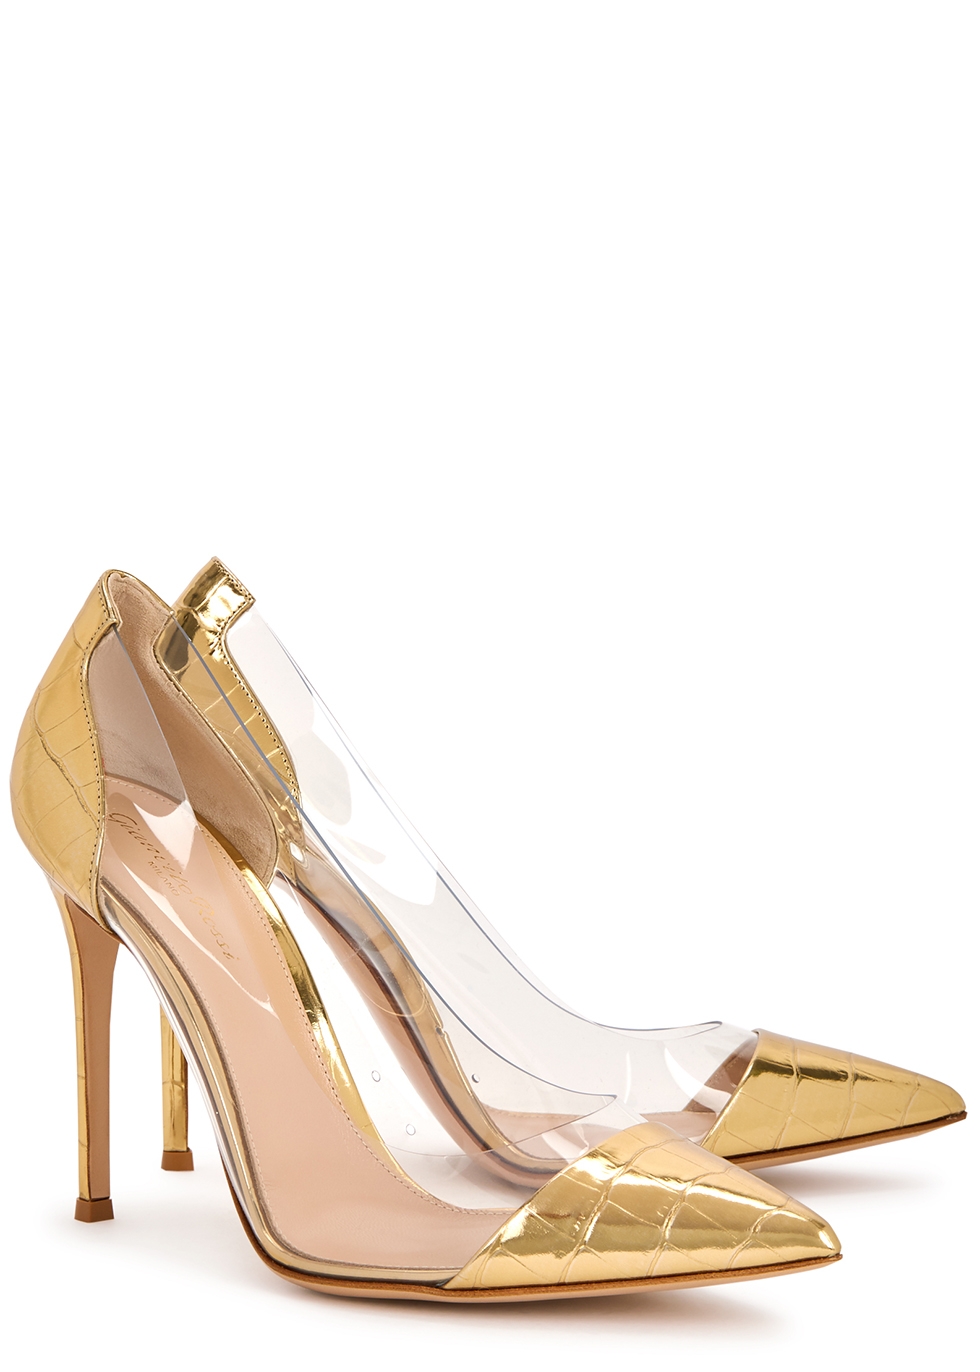 Gianvito Rossi 105 gold leather and 